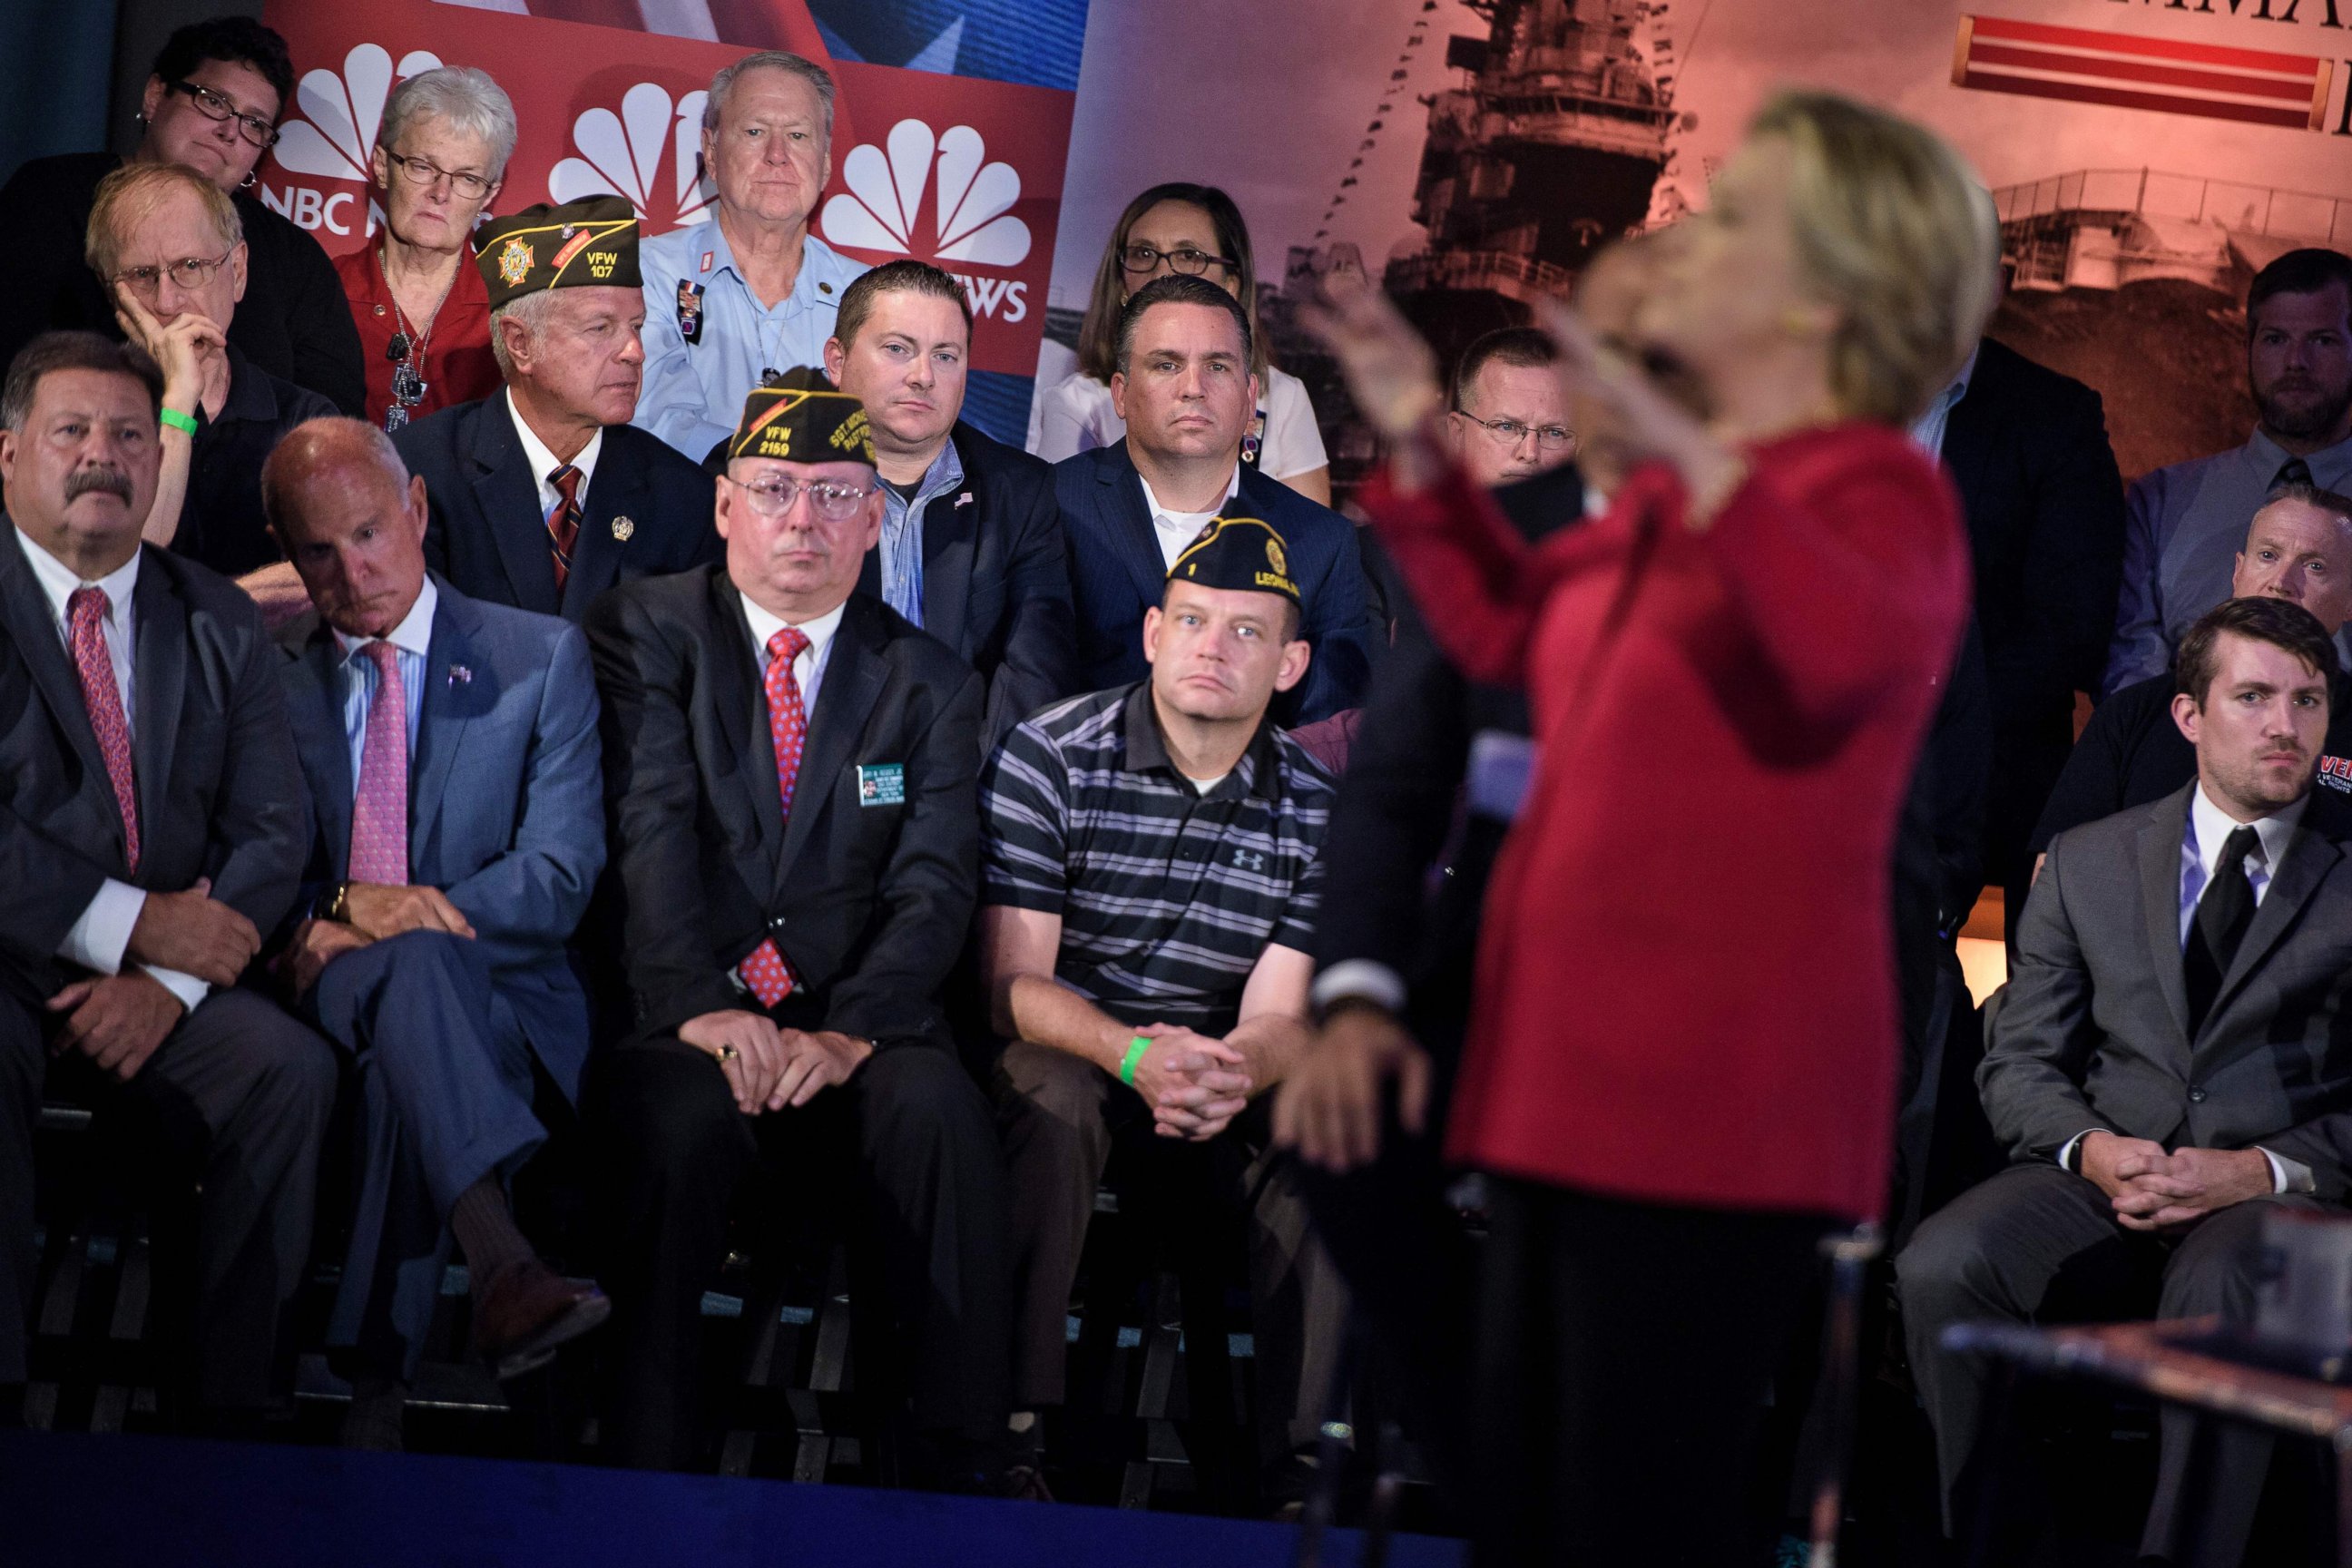 PHOTO:Democratic presidential nominee Hillary Clinton speaks during a veterans forum at the air and space museum aboard the aircraft carrier USS Intrepid on September 7, 2016 in New York, NY.